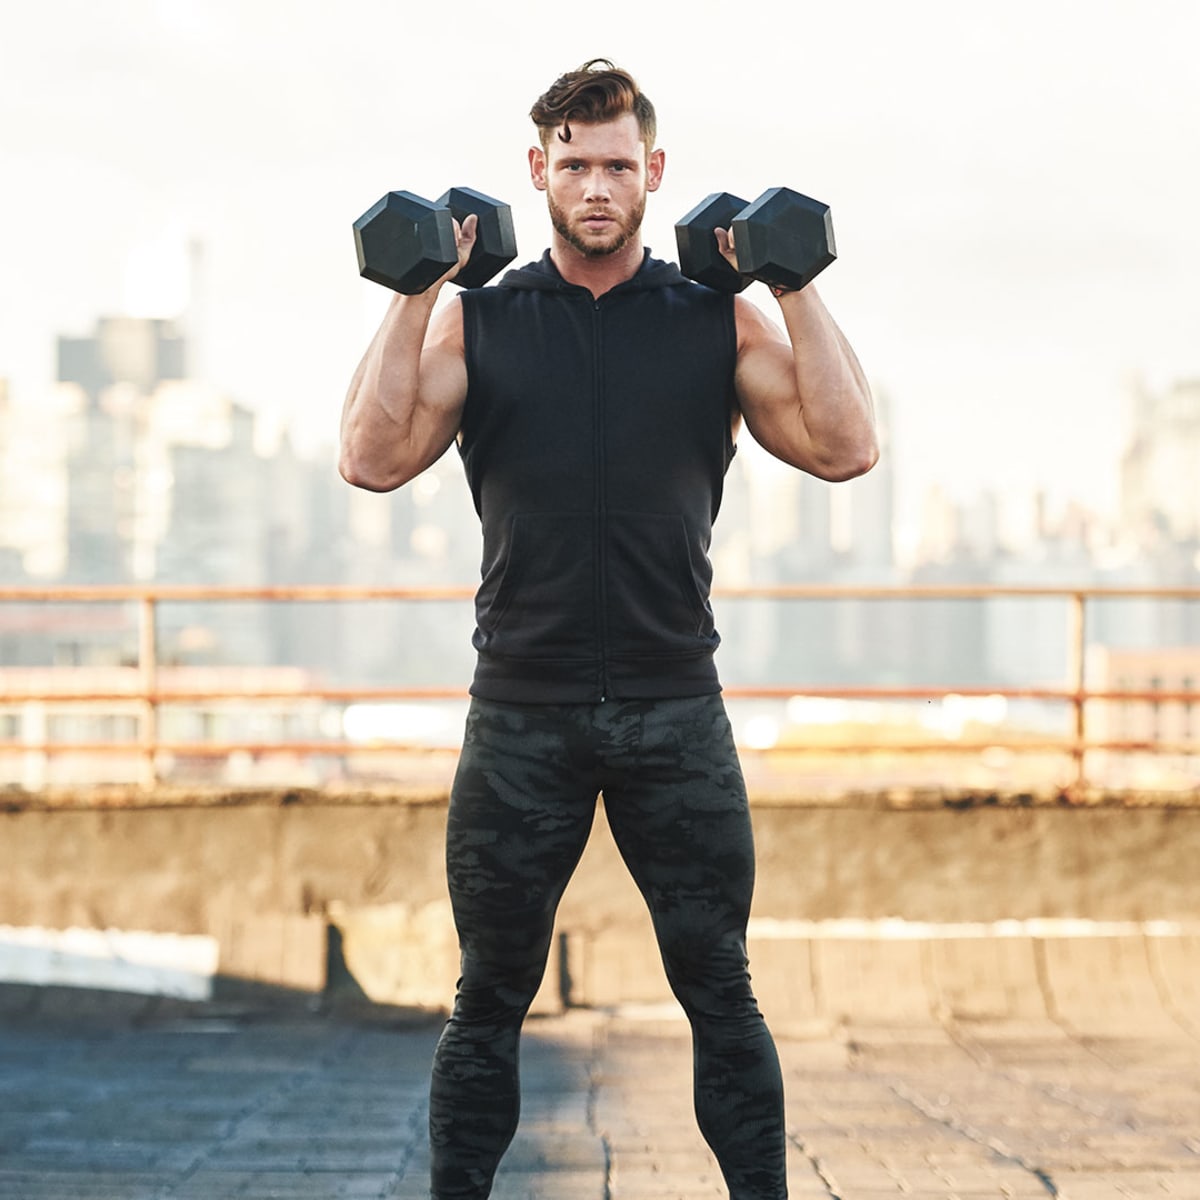 Machine Exercises: The Best All Machine Workout - Men's Journal